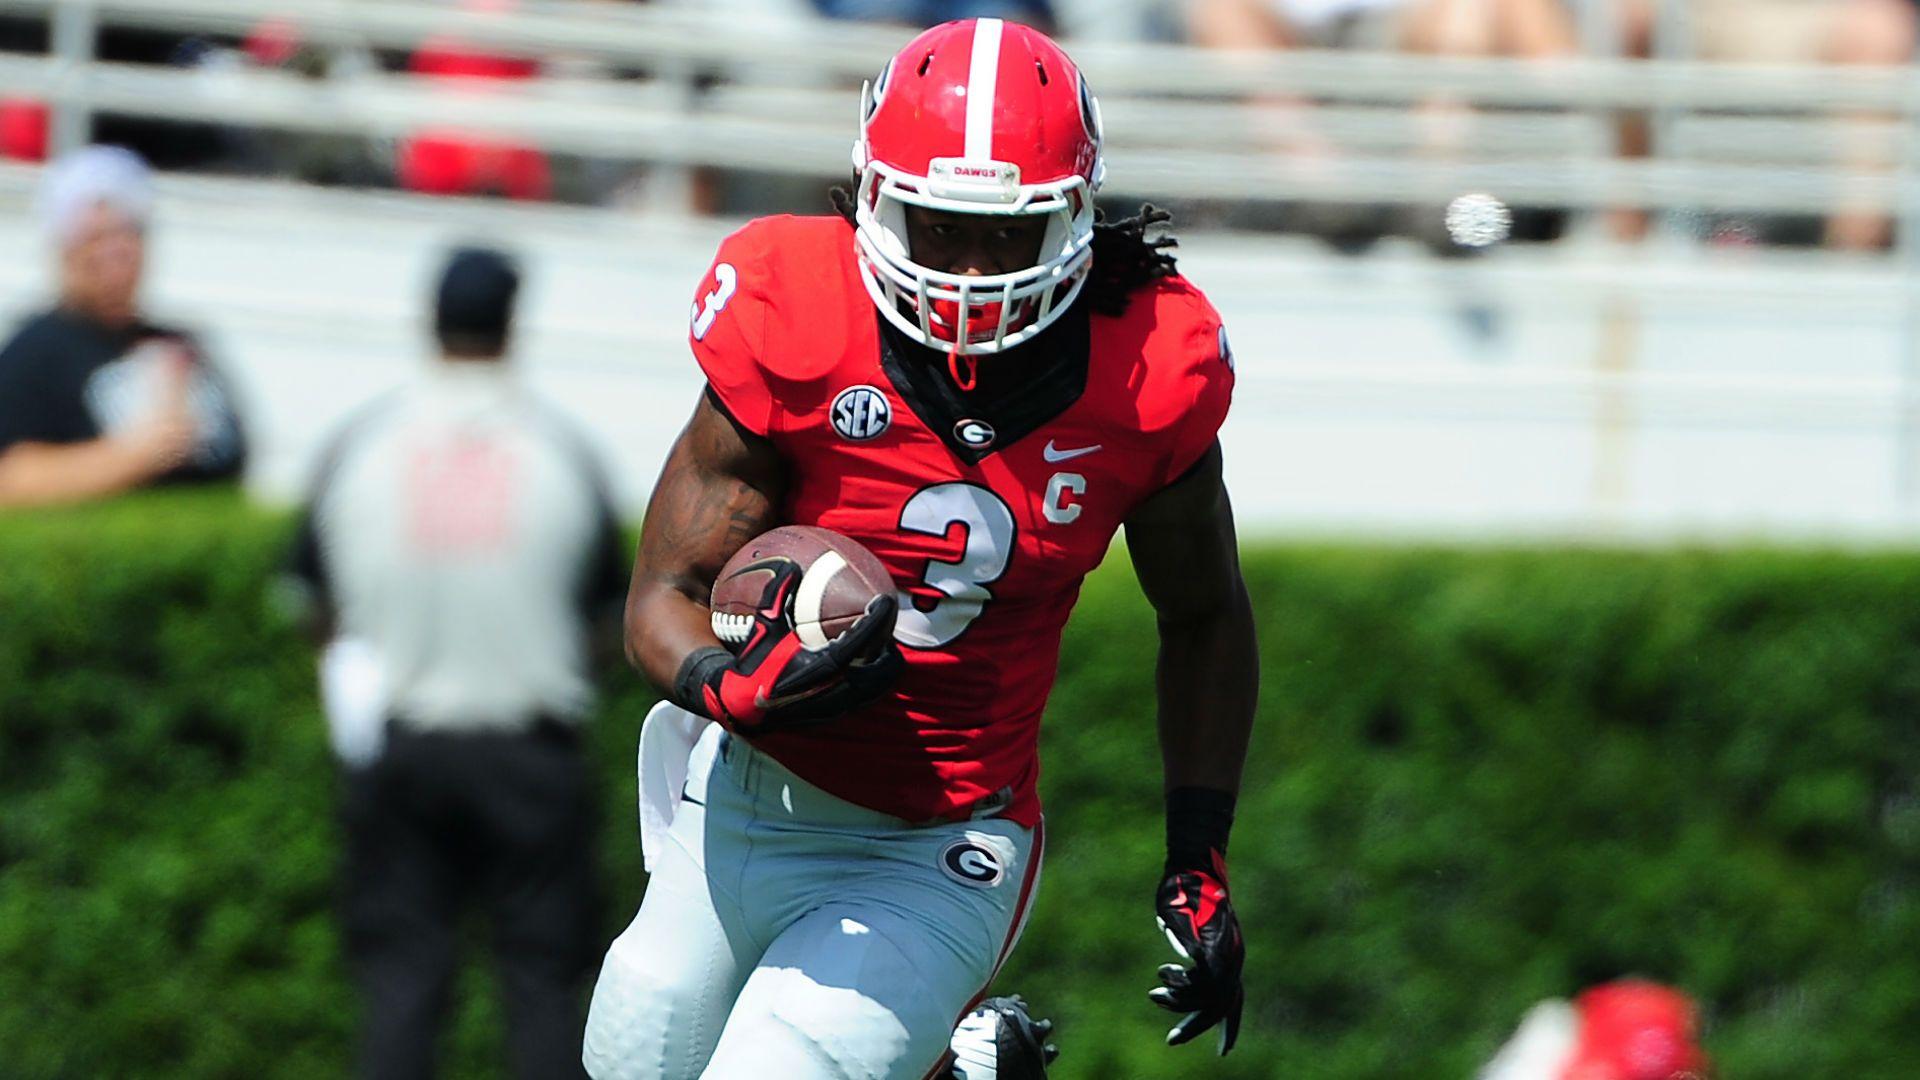 Report: Todd Gurley not traveling with team to Arkansas. NCAA